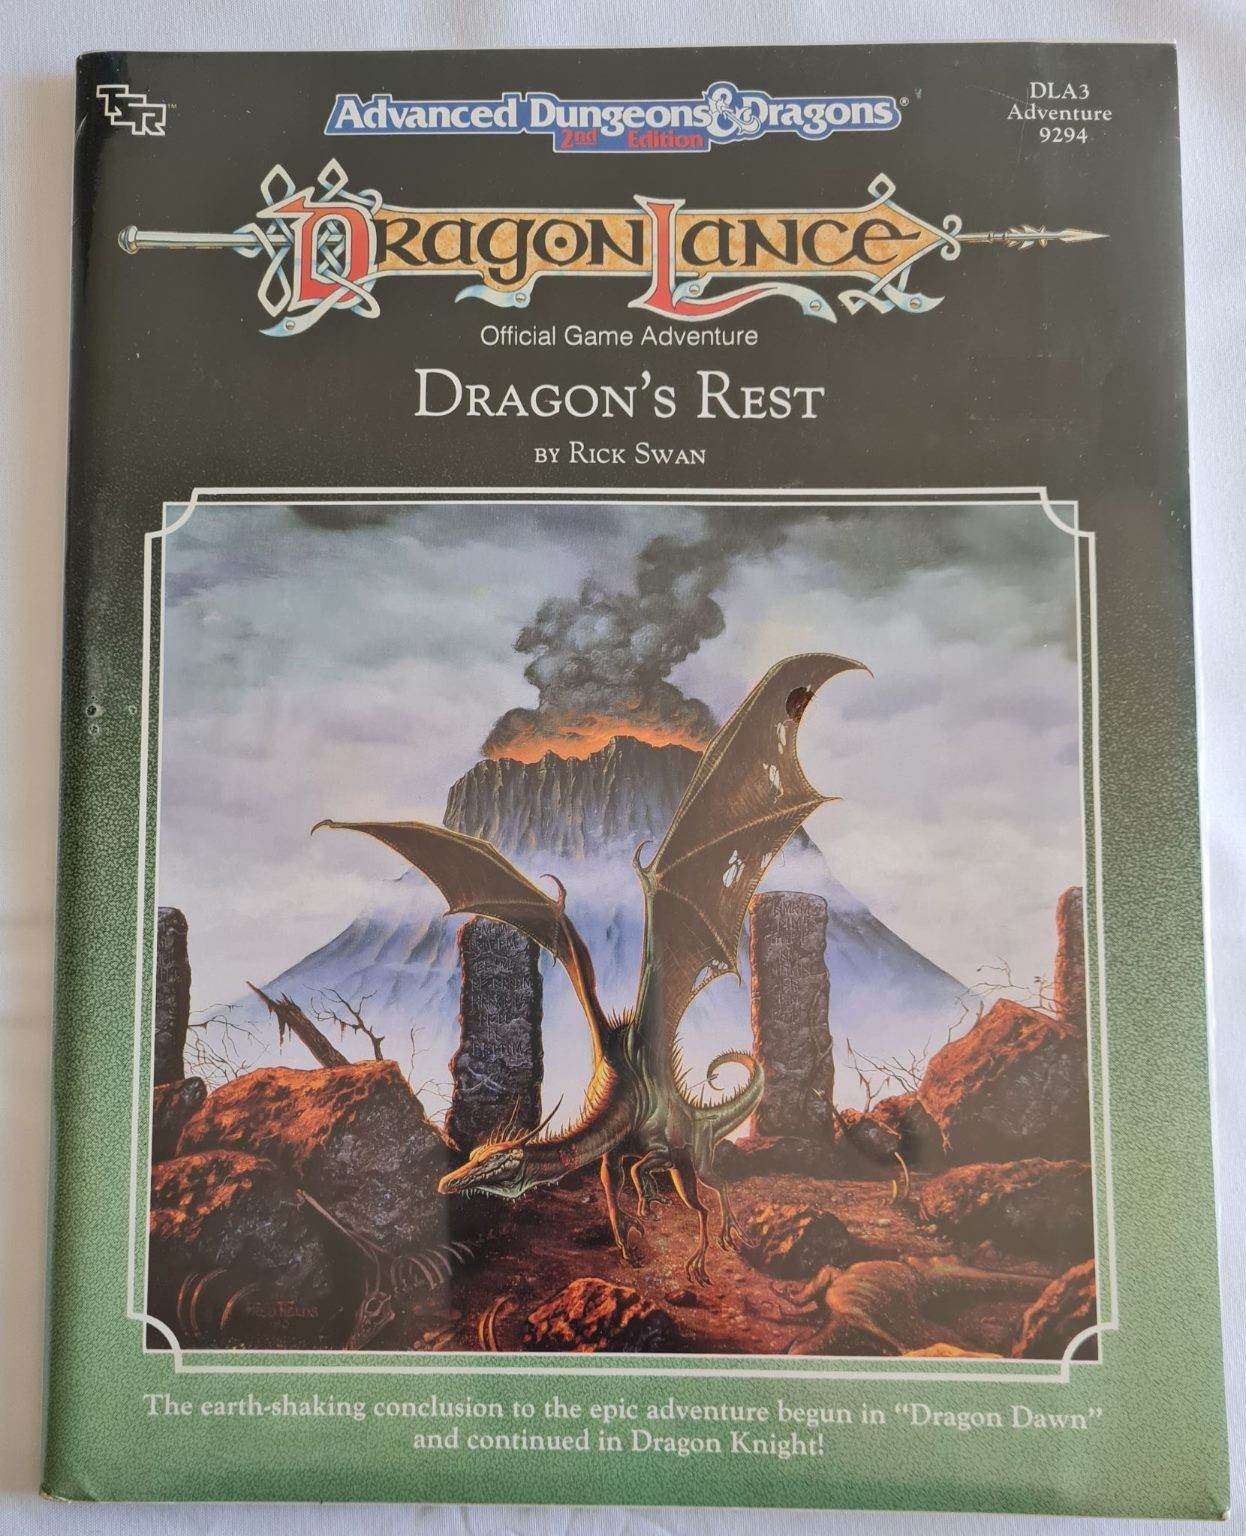 Advanced Dungeons and Dragons - Dragonlance - Dragon's Rest (DLA3 9294) Sealed Default Title